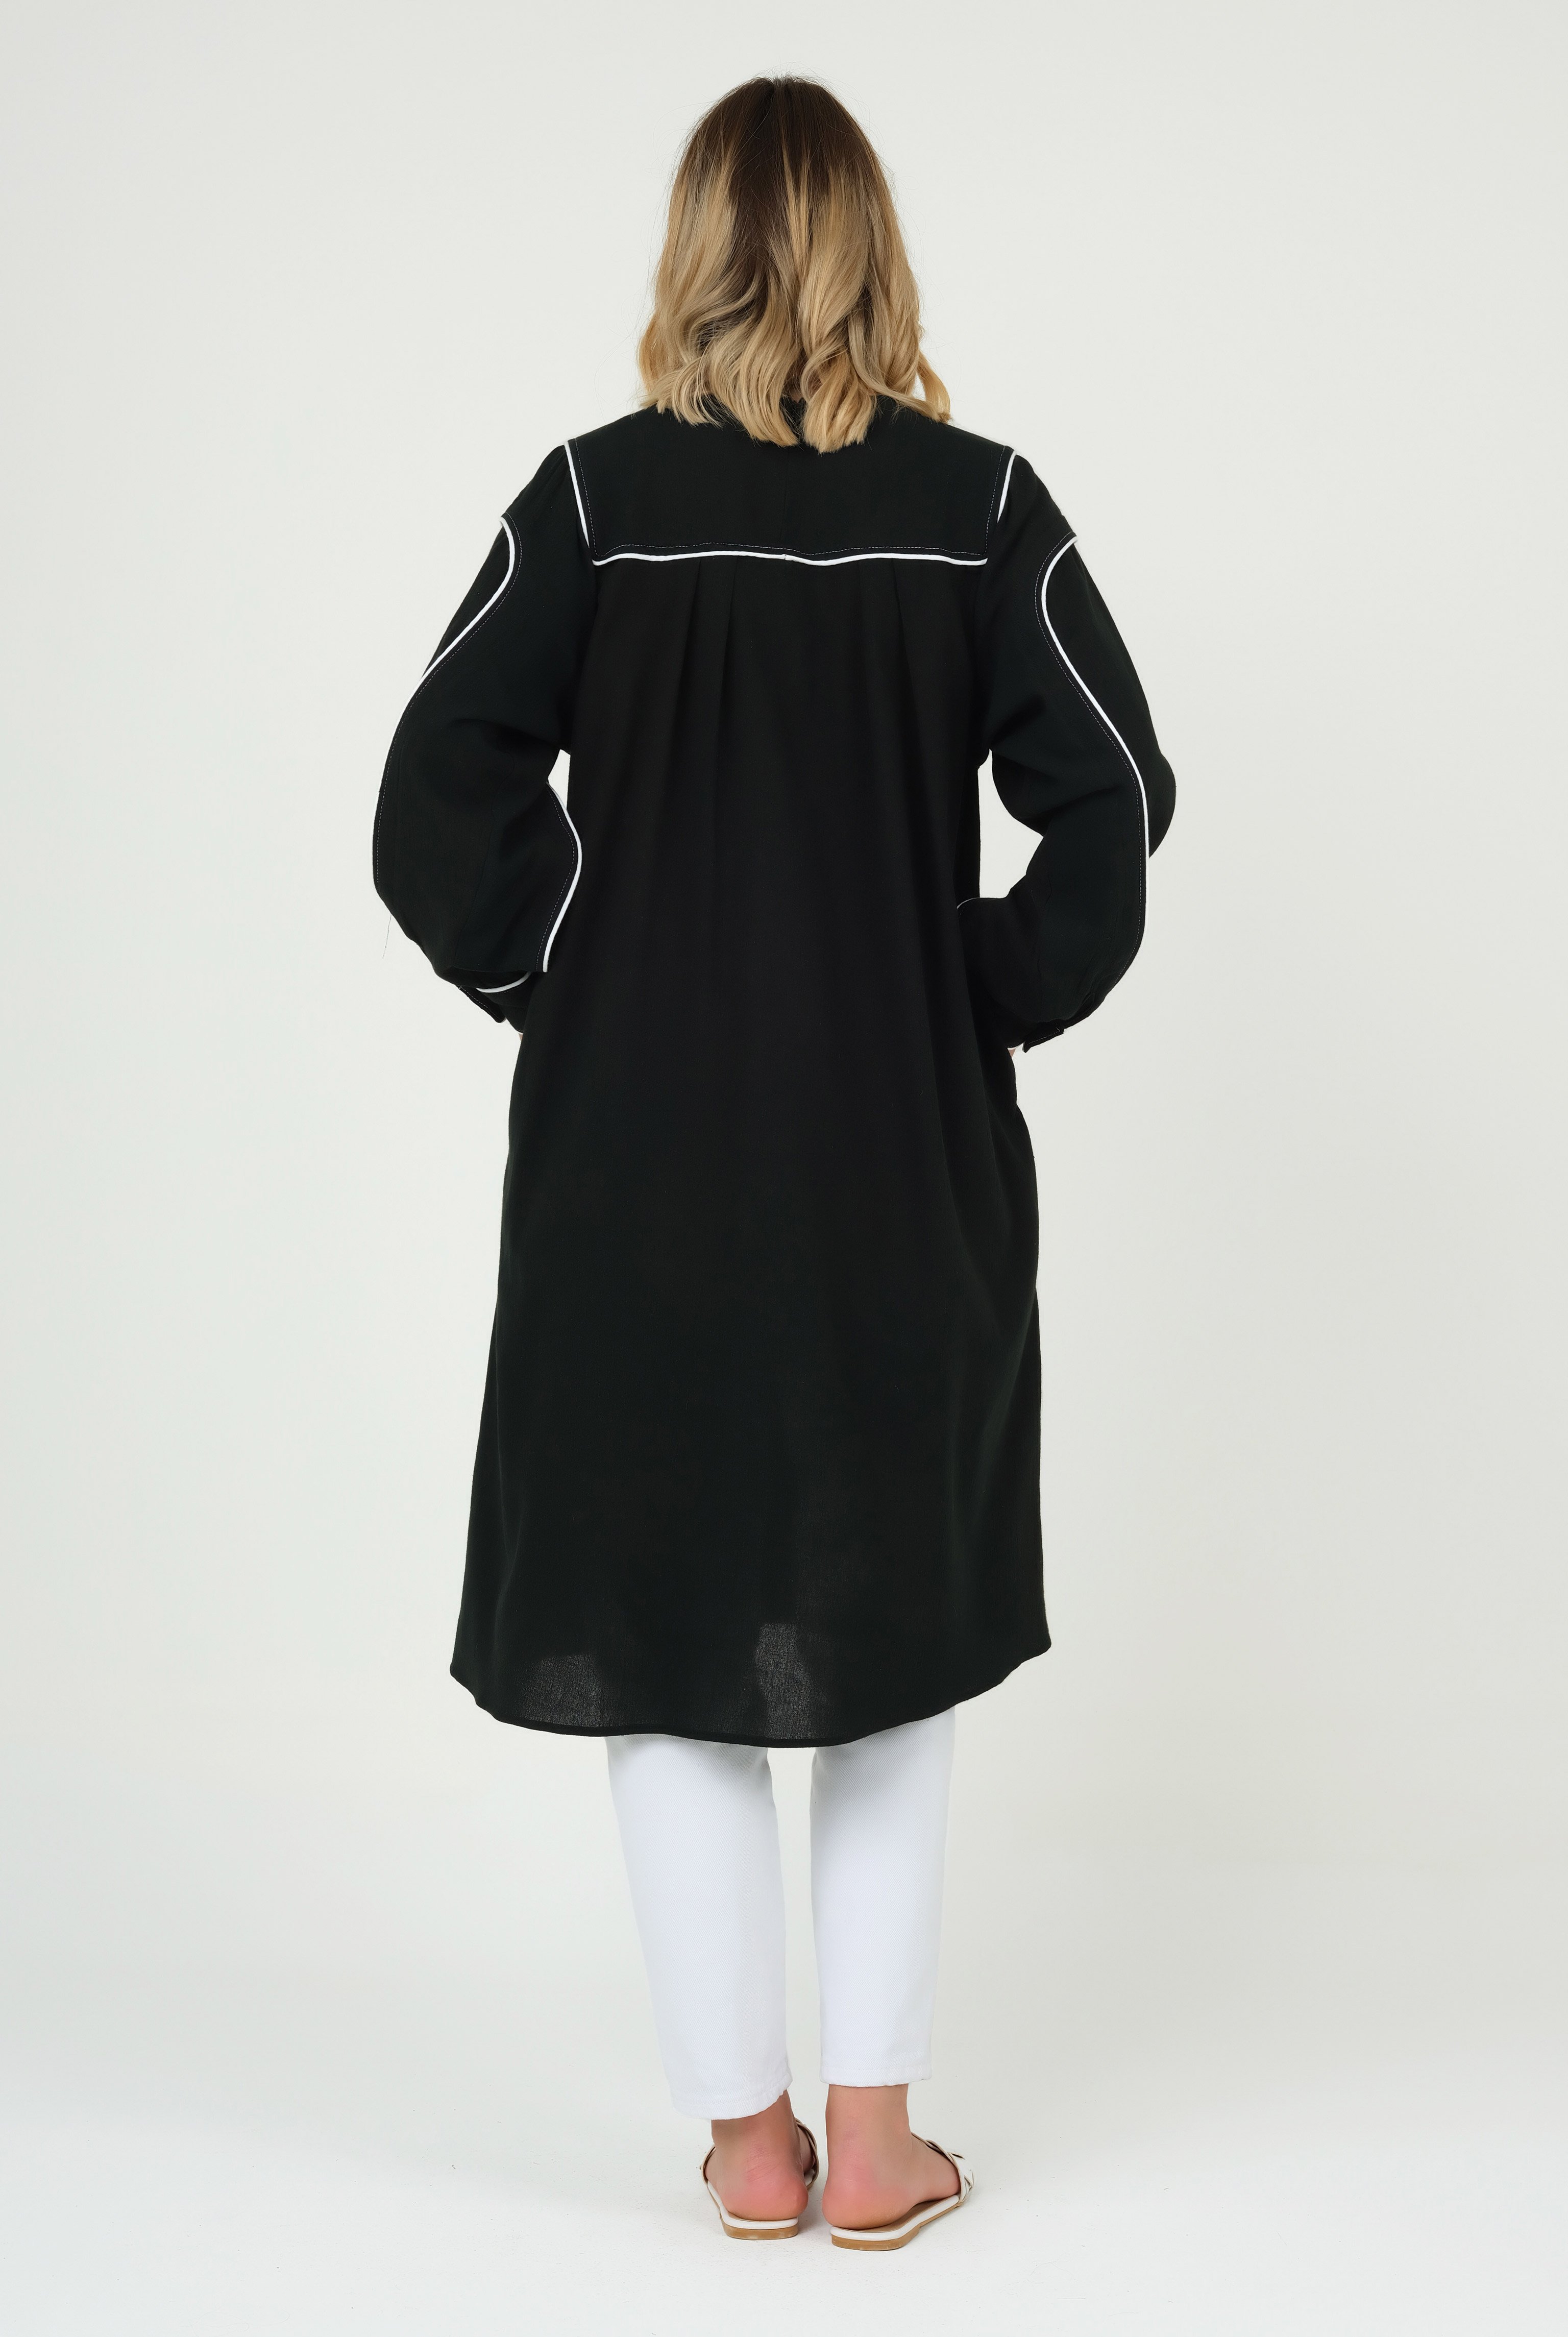 Find Out Tunic Black